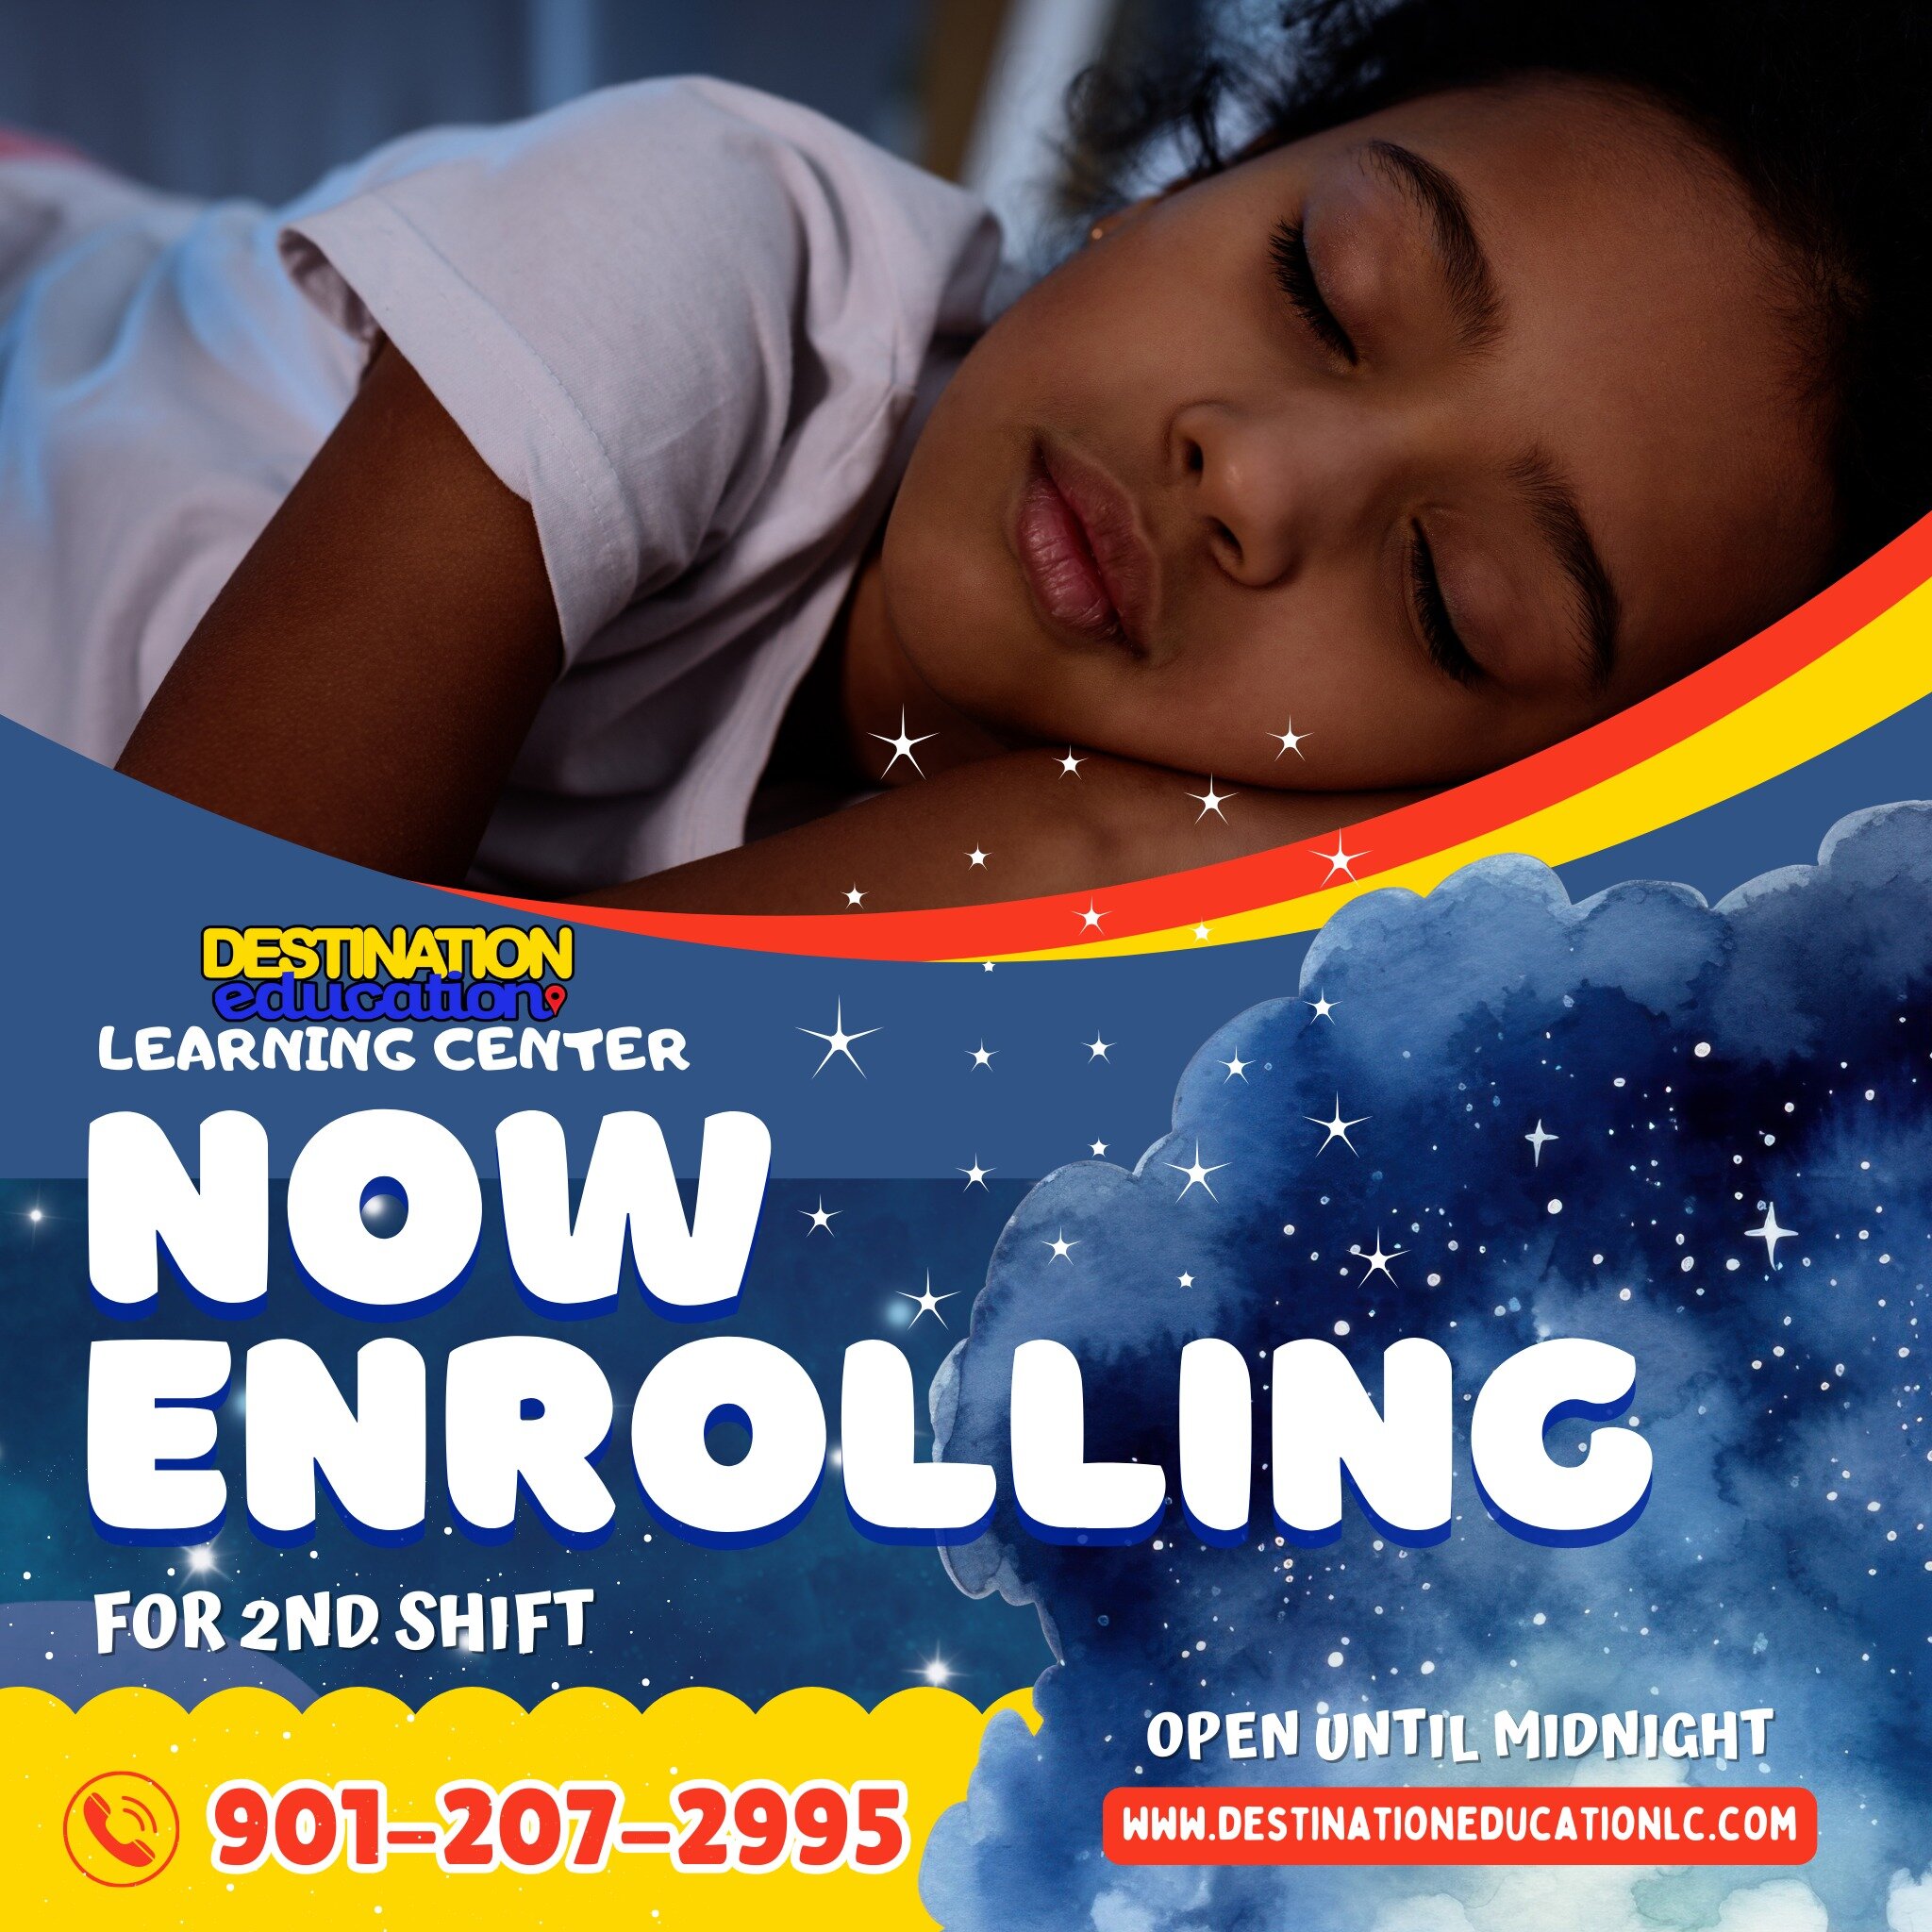 Calling all 2nd Shift parents! 
.
We're thrilled to announce that Destination Education is now enrolling for our second shift. 
.
Have peace of mind knowing that your little one is safe, secure, and receiving exceptional care and education until midn